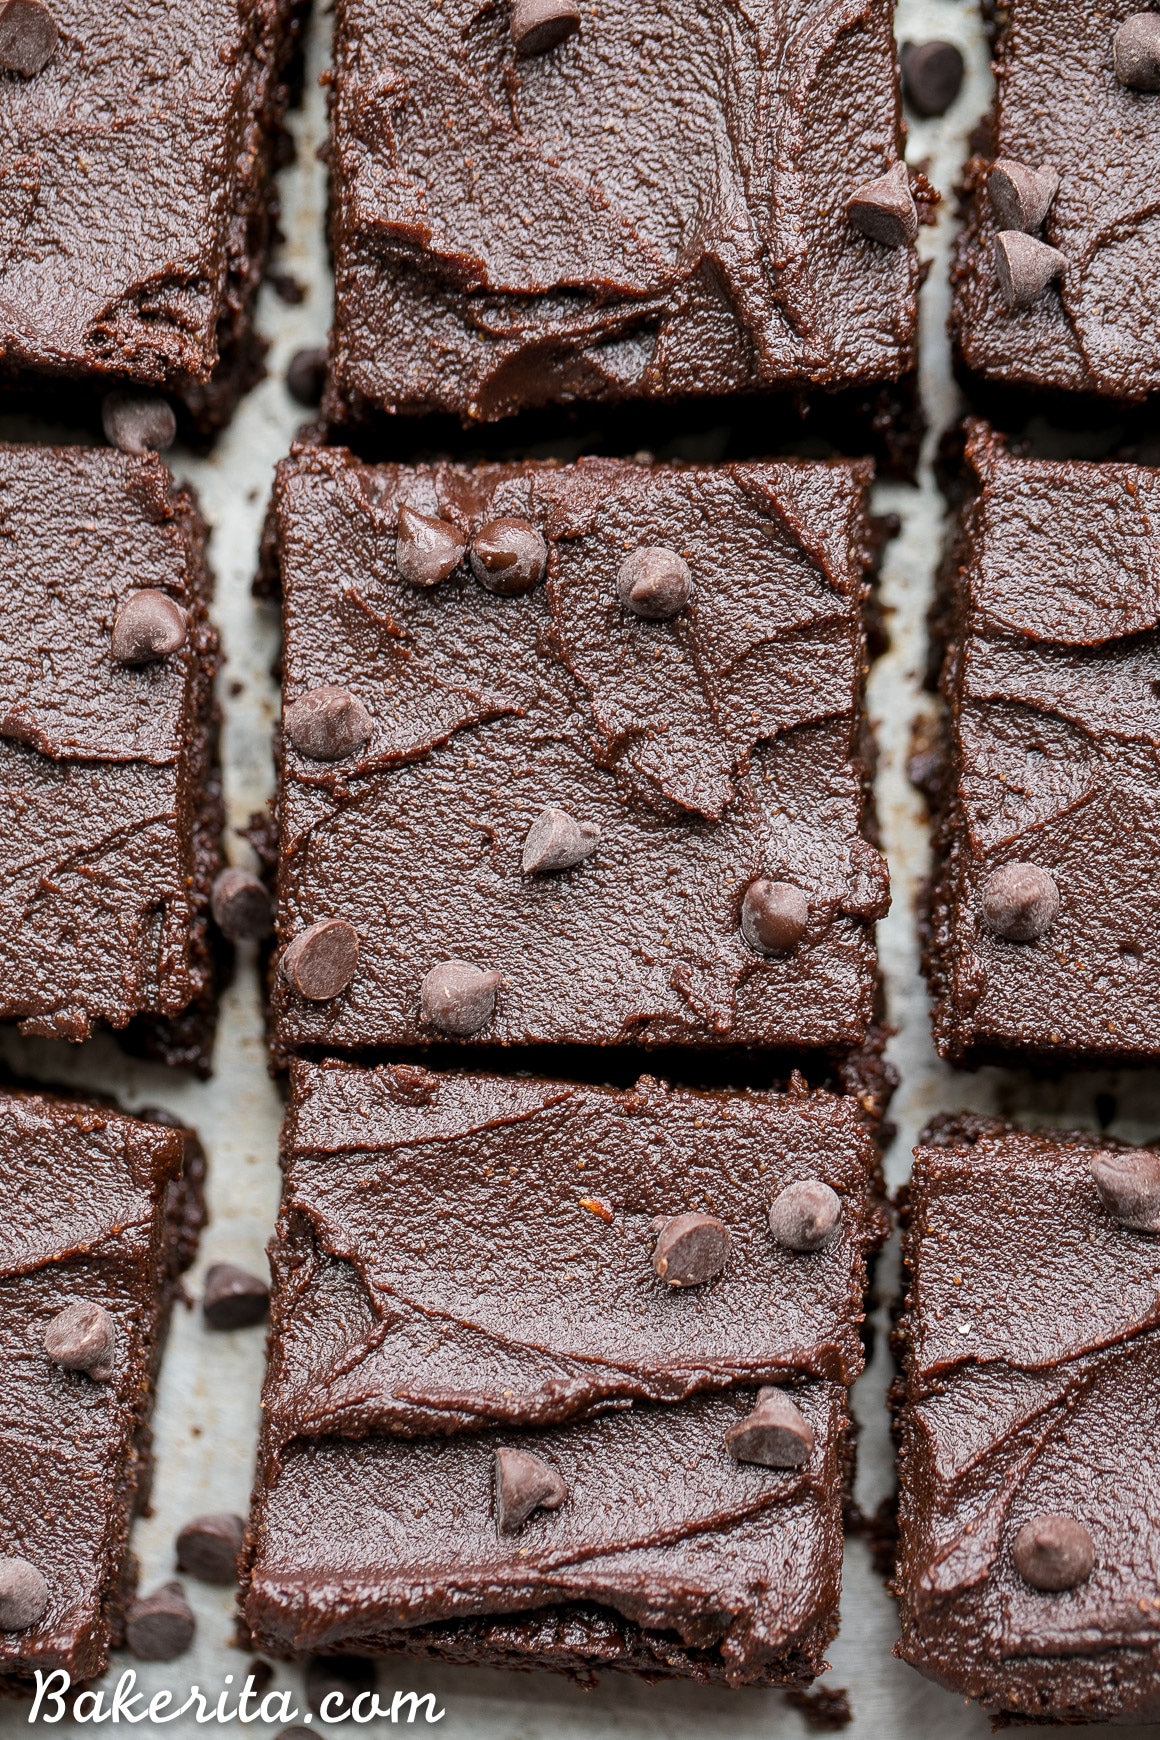 These are the Ultimate Gluten Free Fudge Brownies! This easy recipe makes incredibly fudgy, melt in your mouth chocolate brownies with an optional paleo chocolate frosting on top. This recipe is refined sugar free and Paleo-friendly.